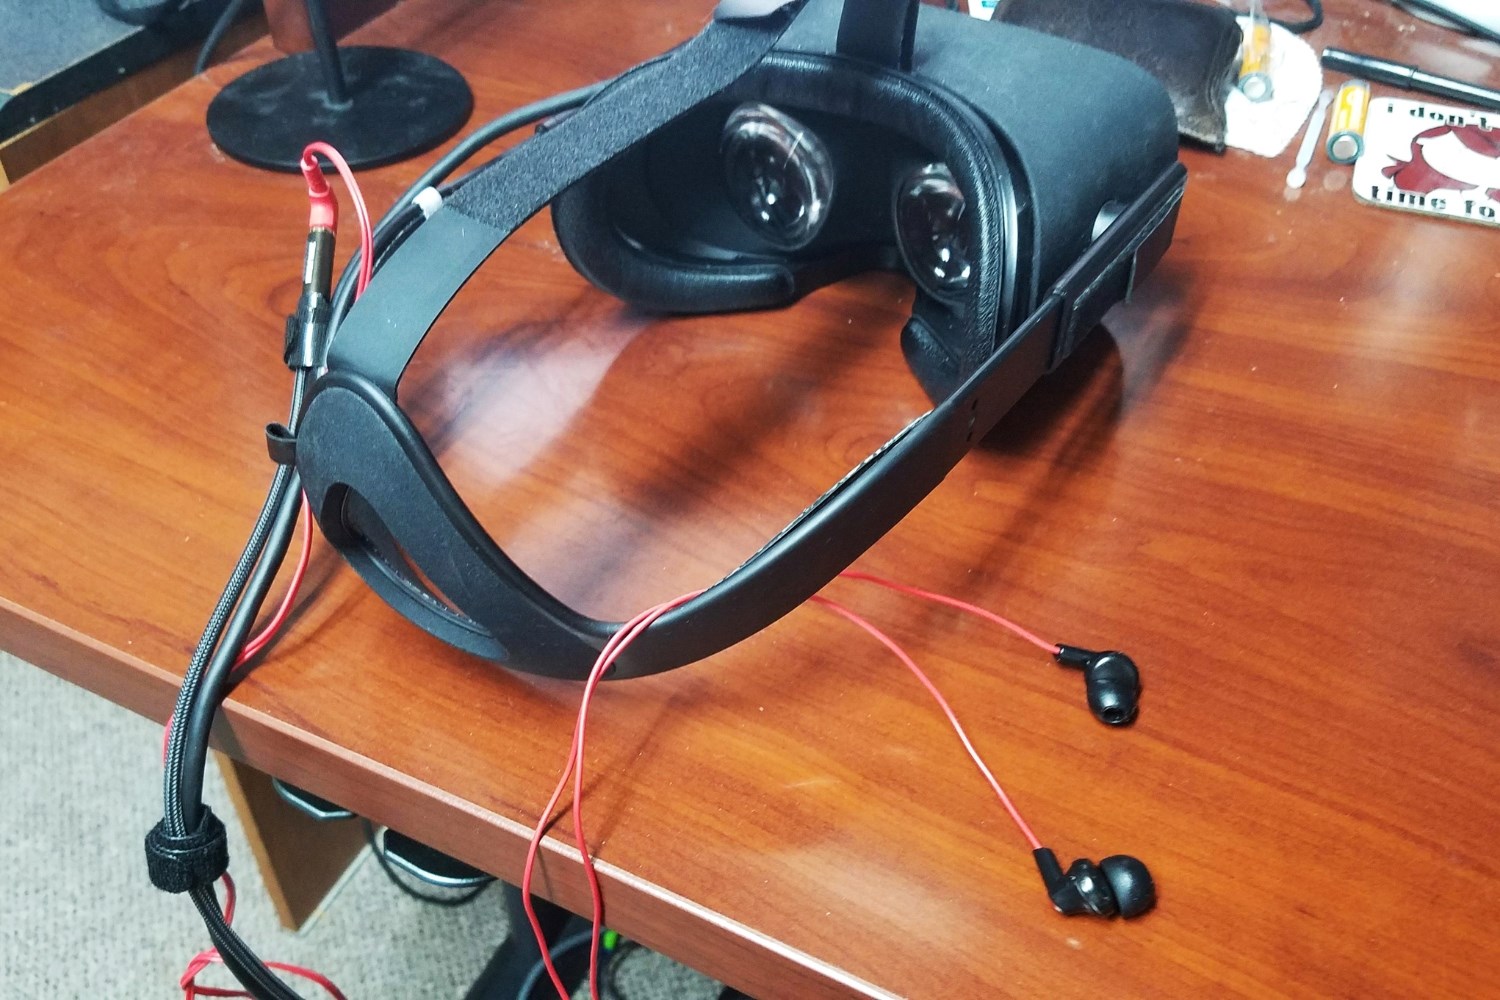 How To Fix Audio For Oculus Rift For PC